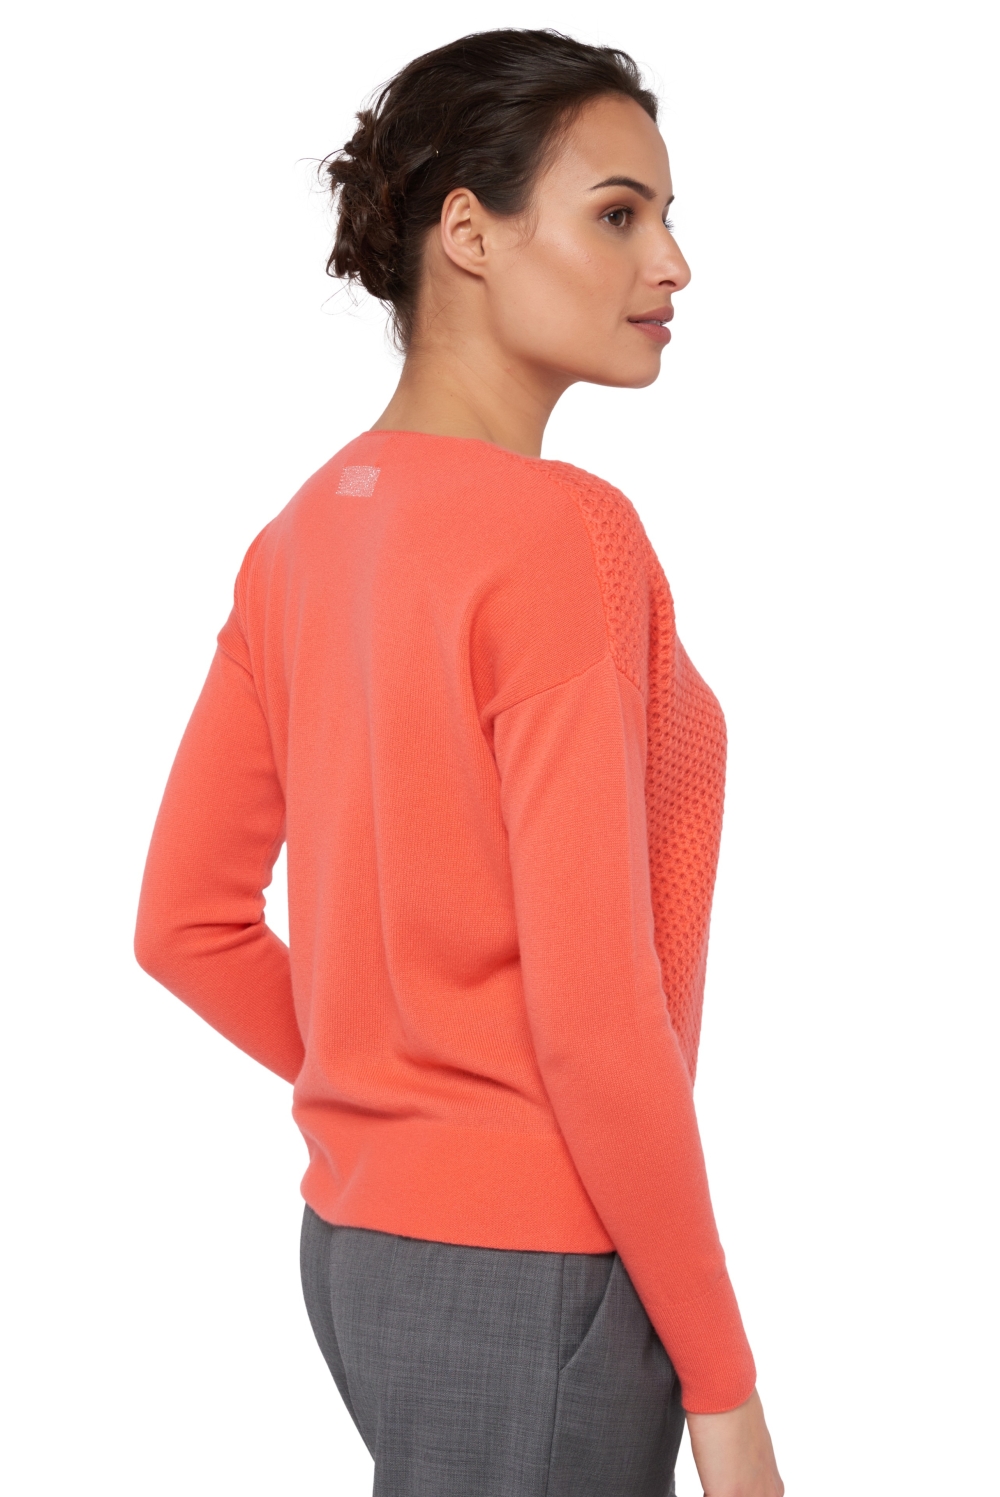 Cachemire pull femme col v willow corail lumineux t2